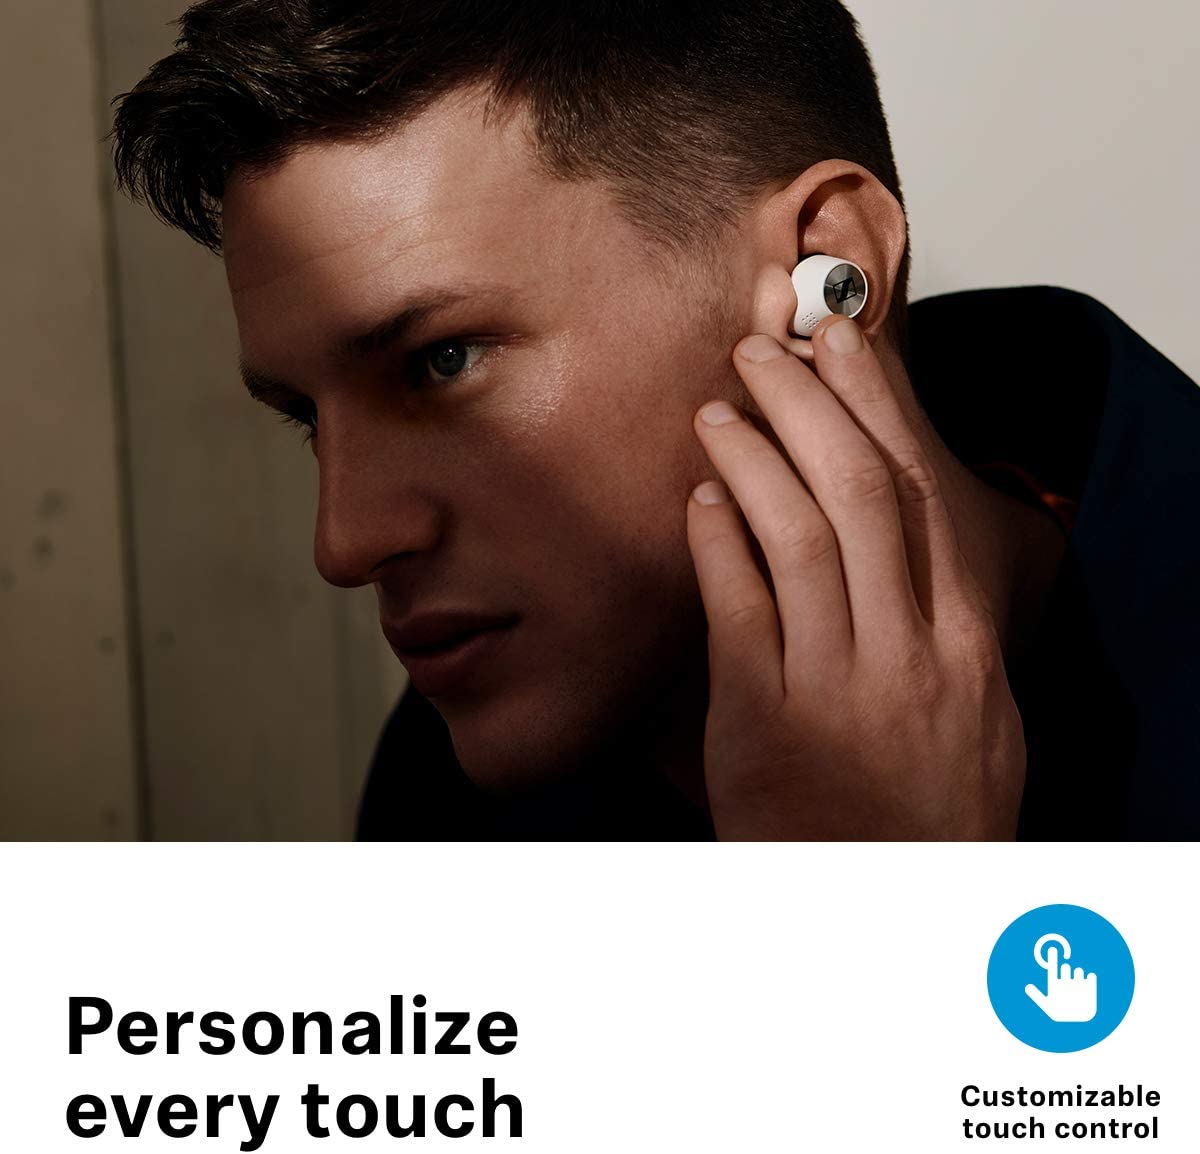 Sennheiser Momentum True Wireless 2 - Bluetooth in- Ear Buds with Active Noise Cancellation, Smart Pause, Customizable Touch Control and 28-Hour Battery Life